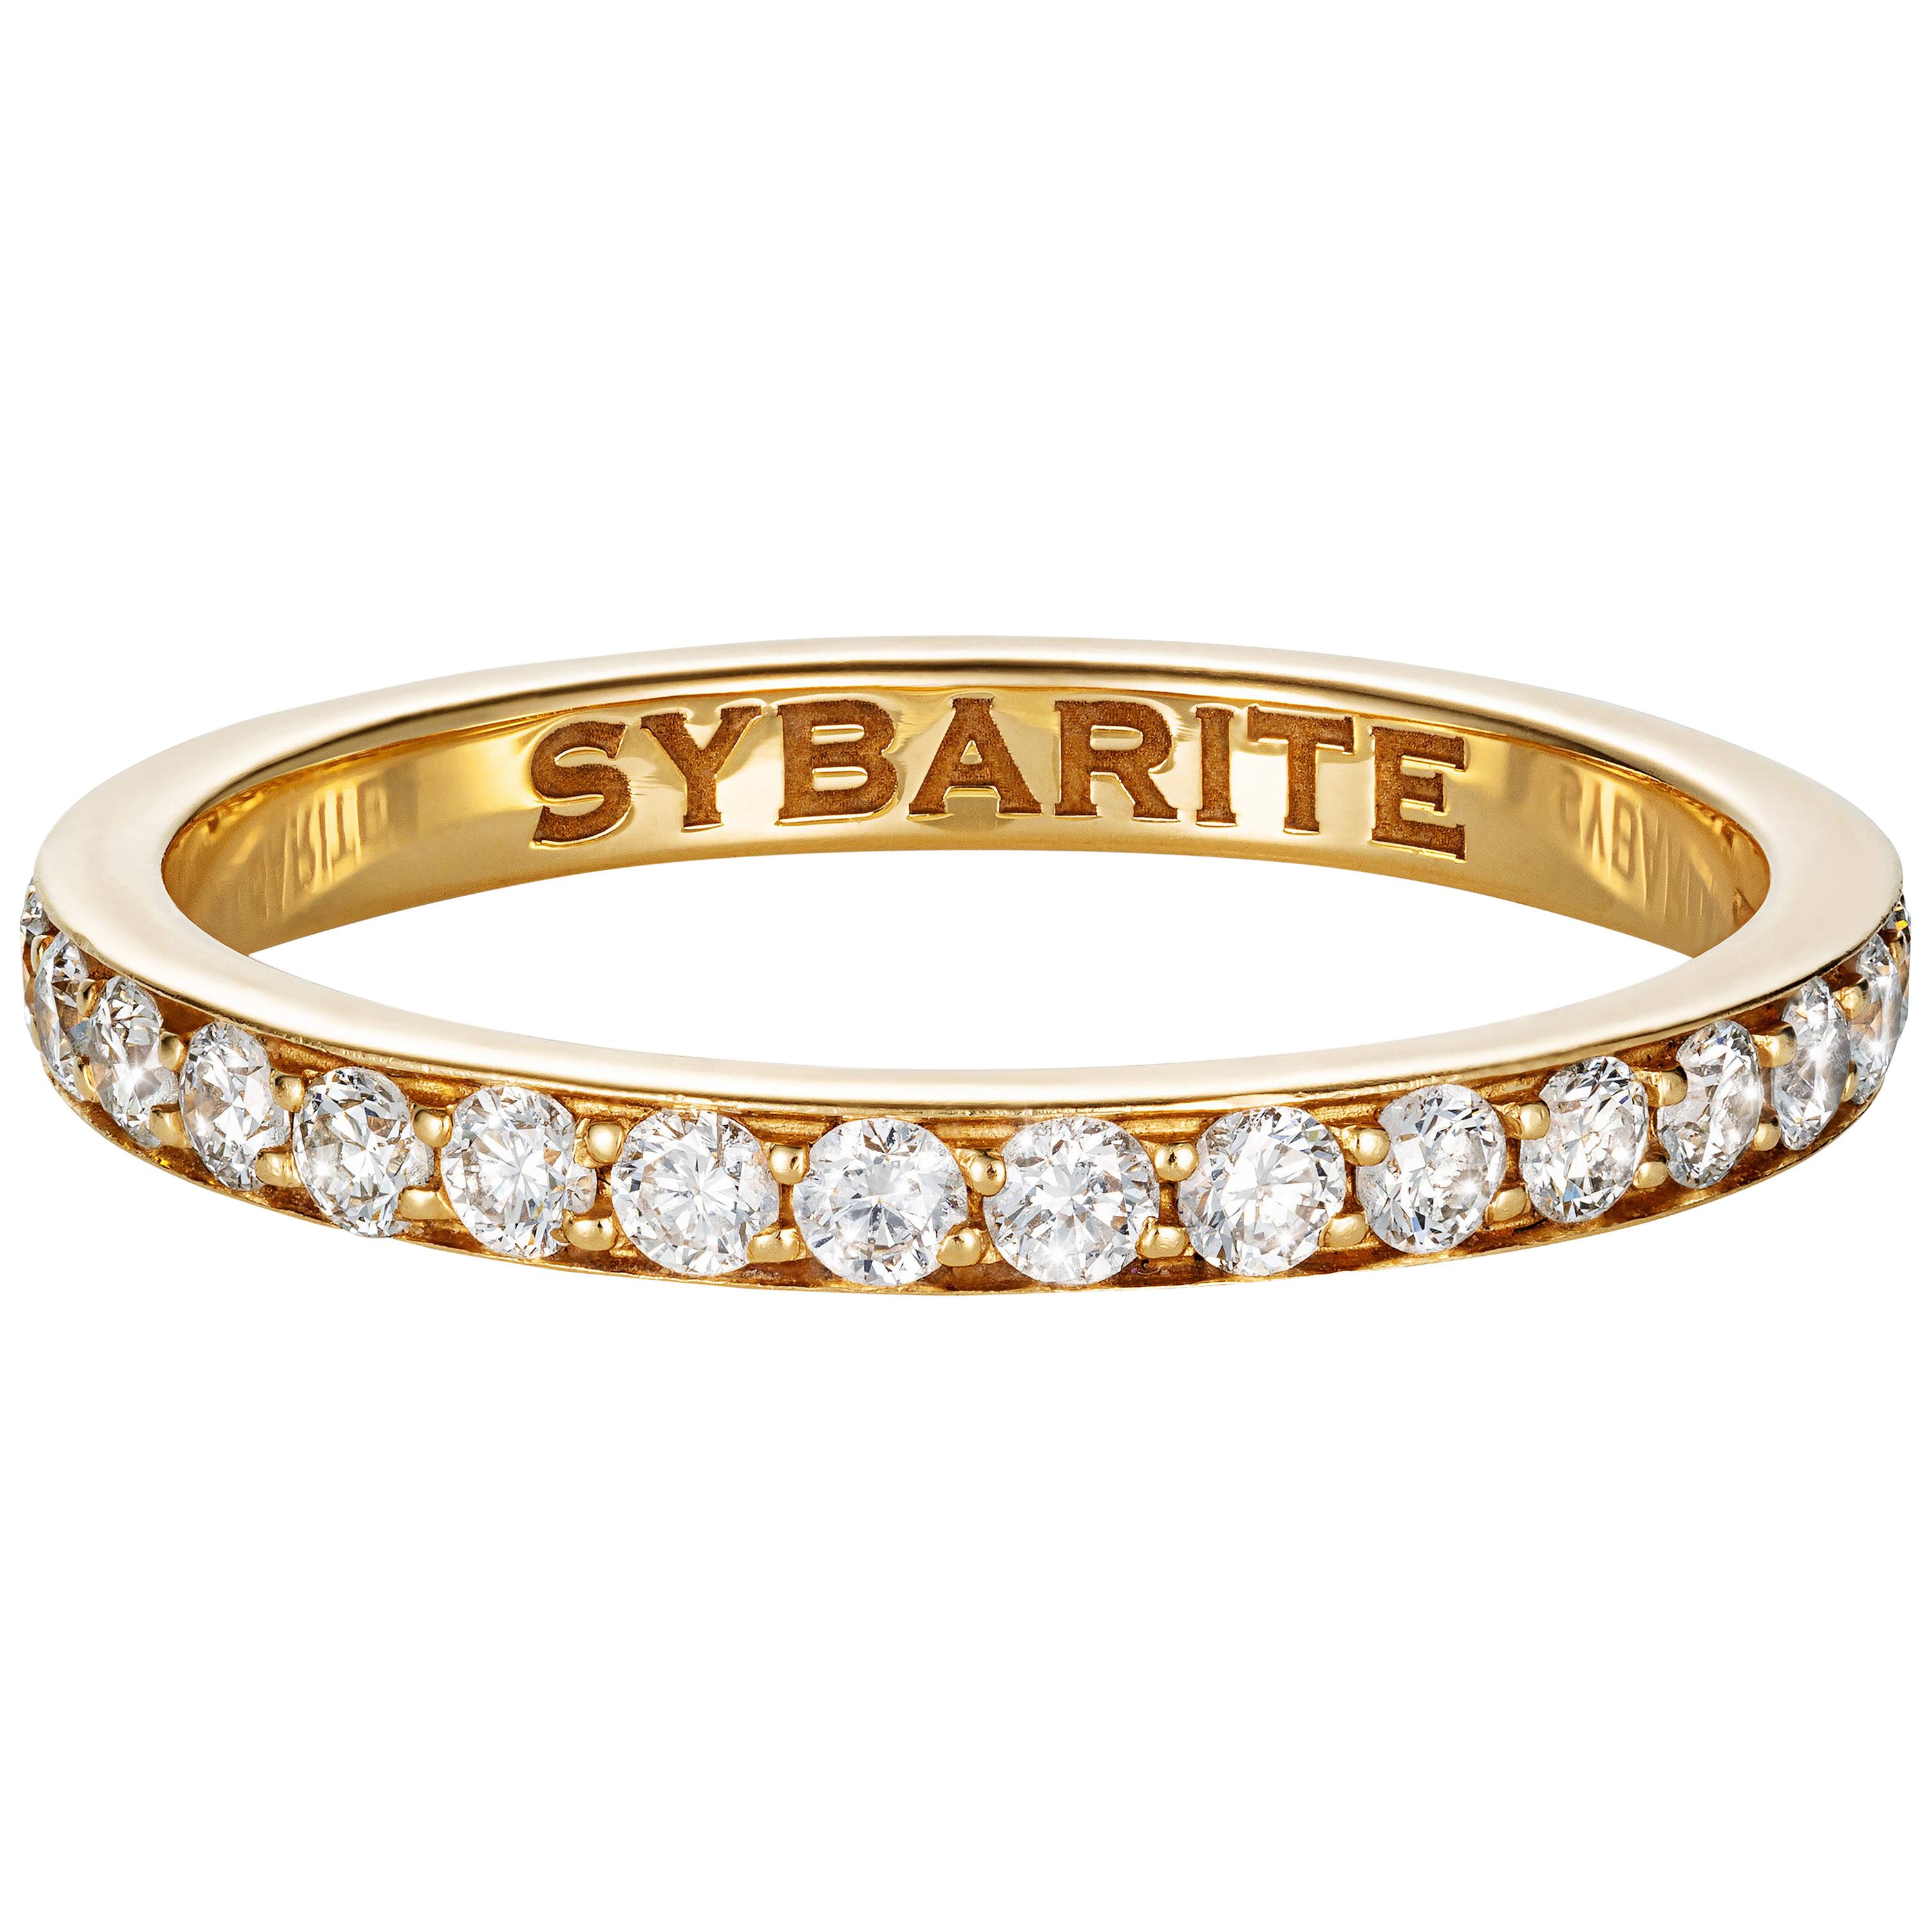 Sybarite Classic Band Ring in Yellow Gold with White Diamonds